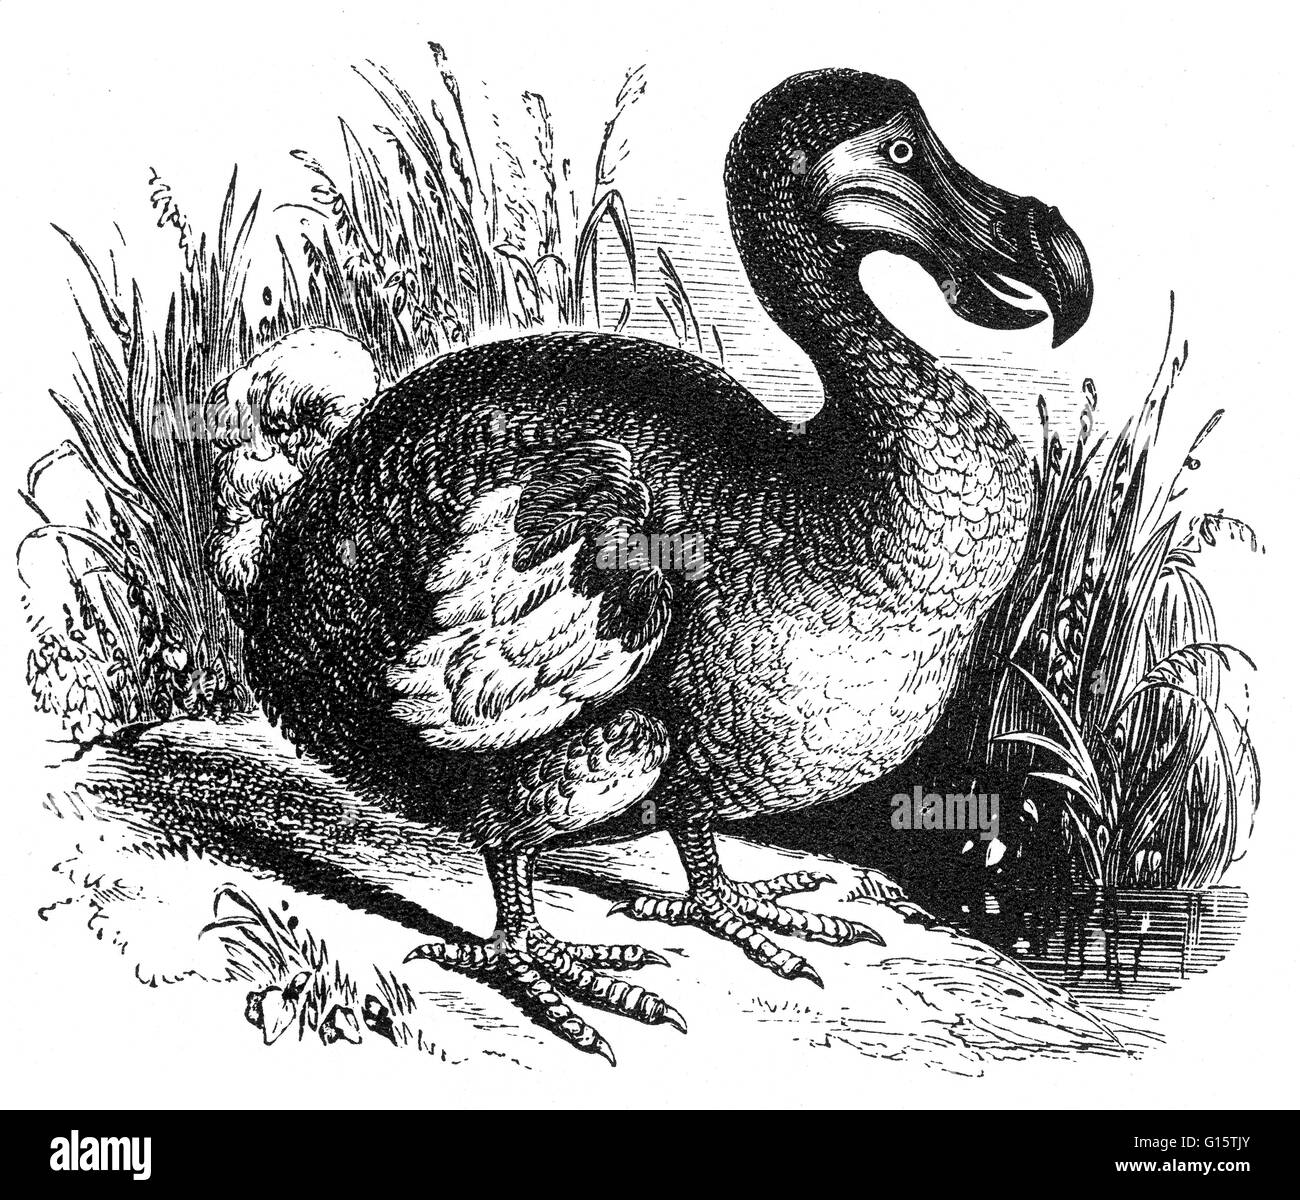 The Dodo is an extinct flightless bird. Its external appearance is evidenced only by paintings and written accounts from the 17th century. Because these vary considerably, and because only a few sketches are known to have been drawn from live specimens, i Stock Photo